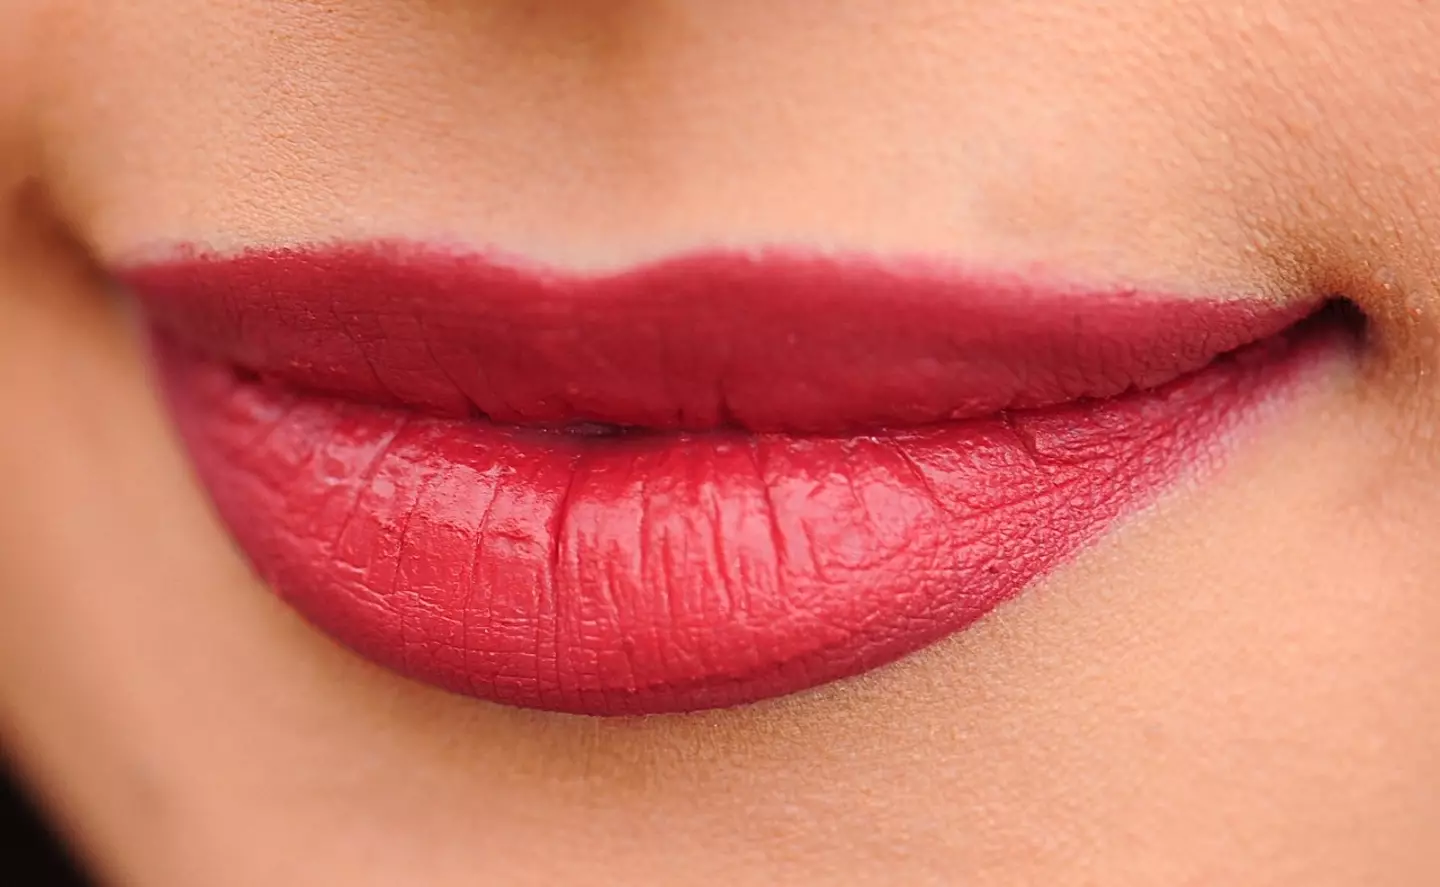 Lips form part of what is called the 'golden triangle'.